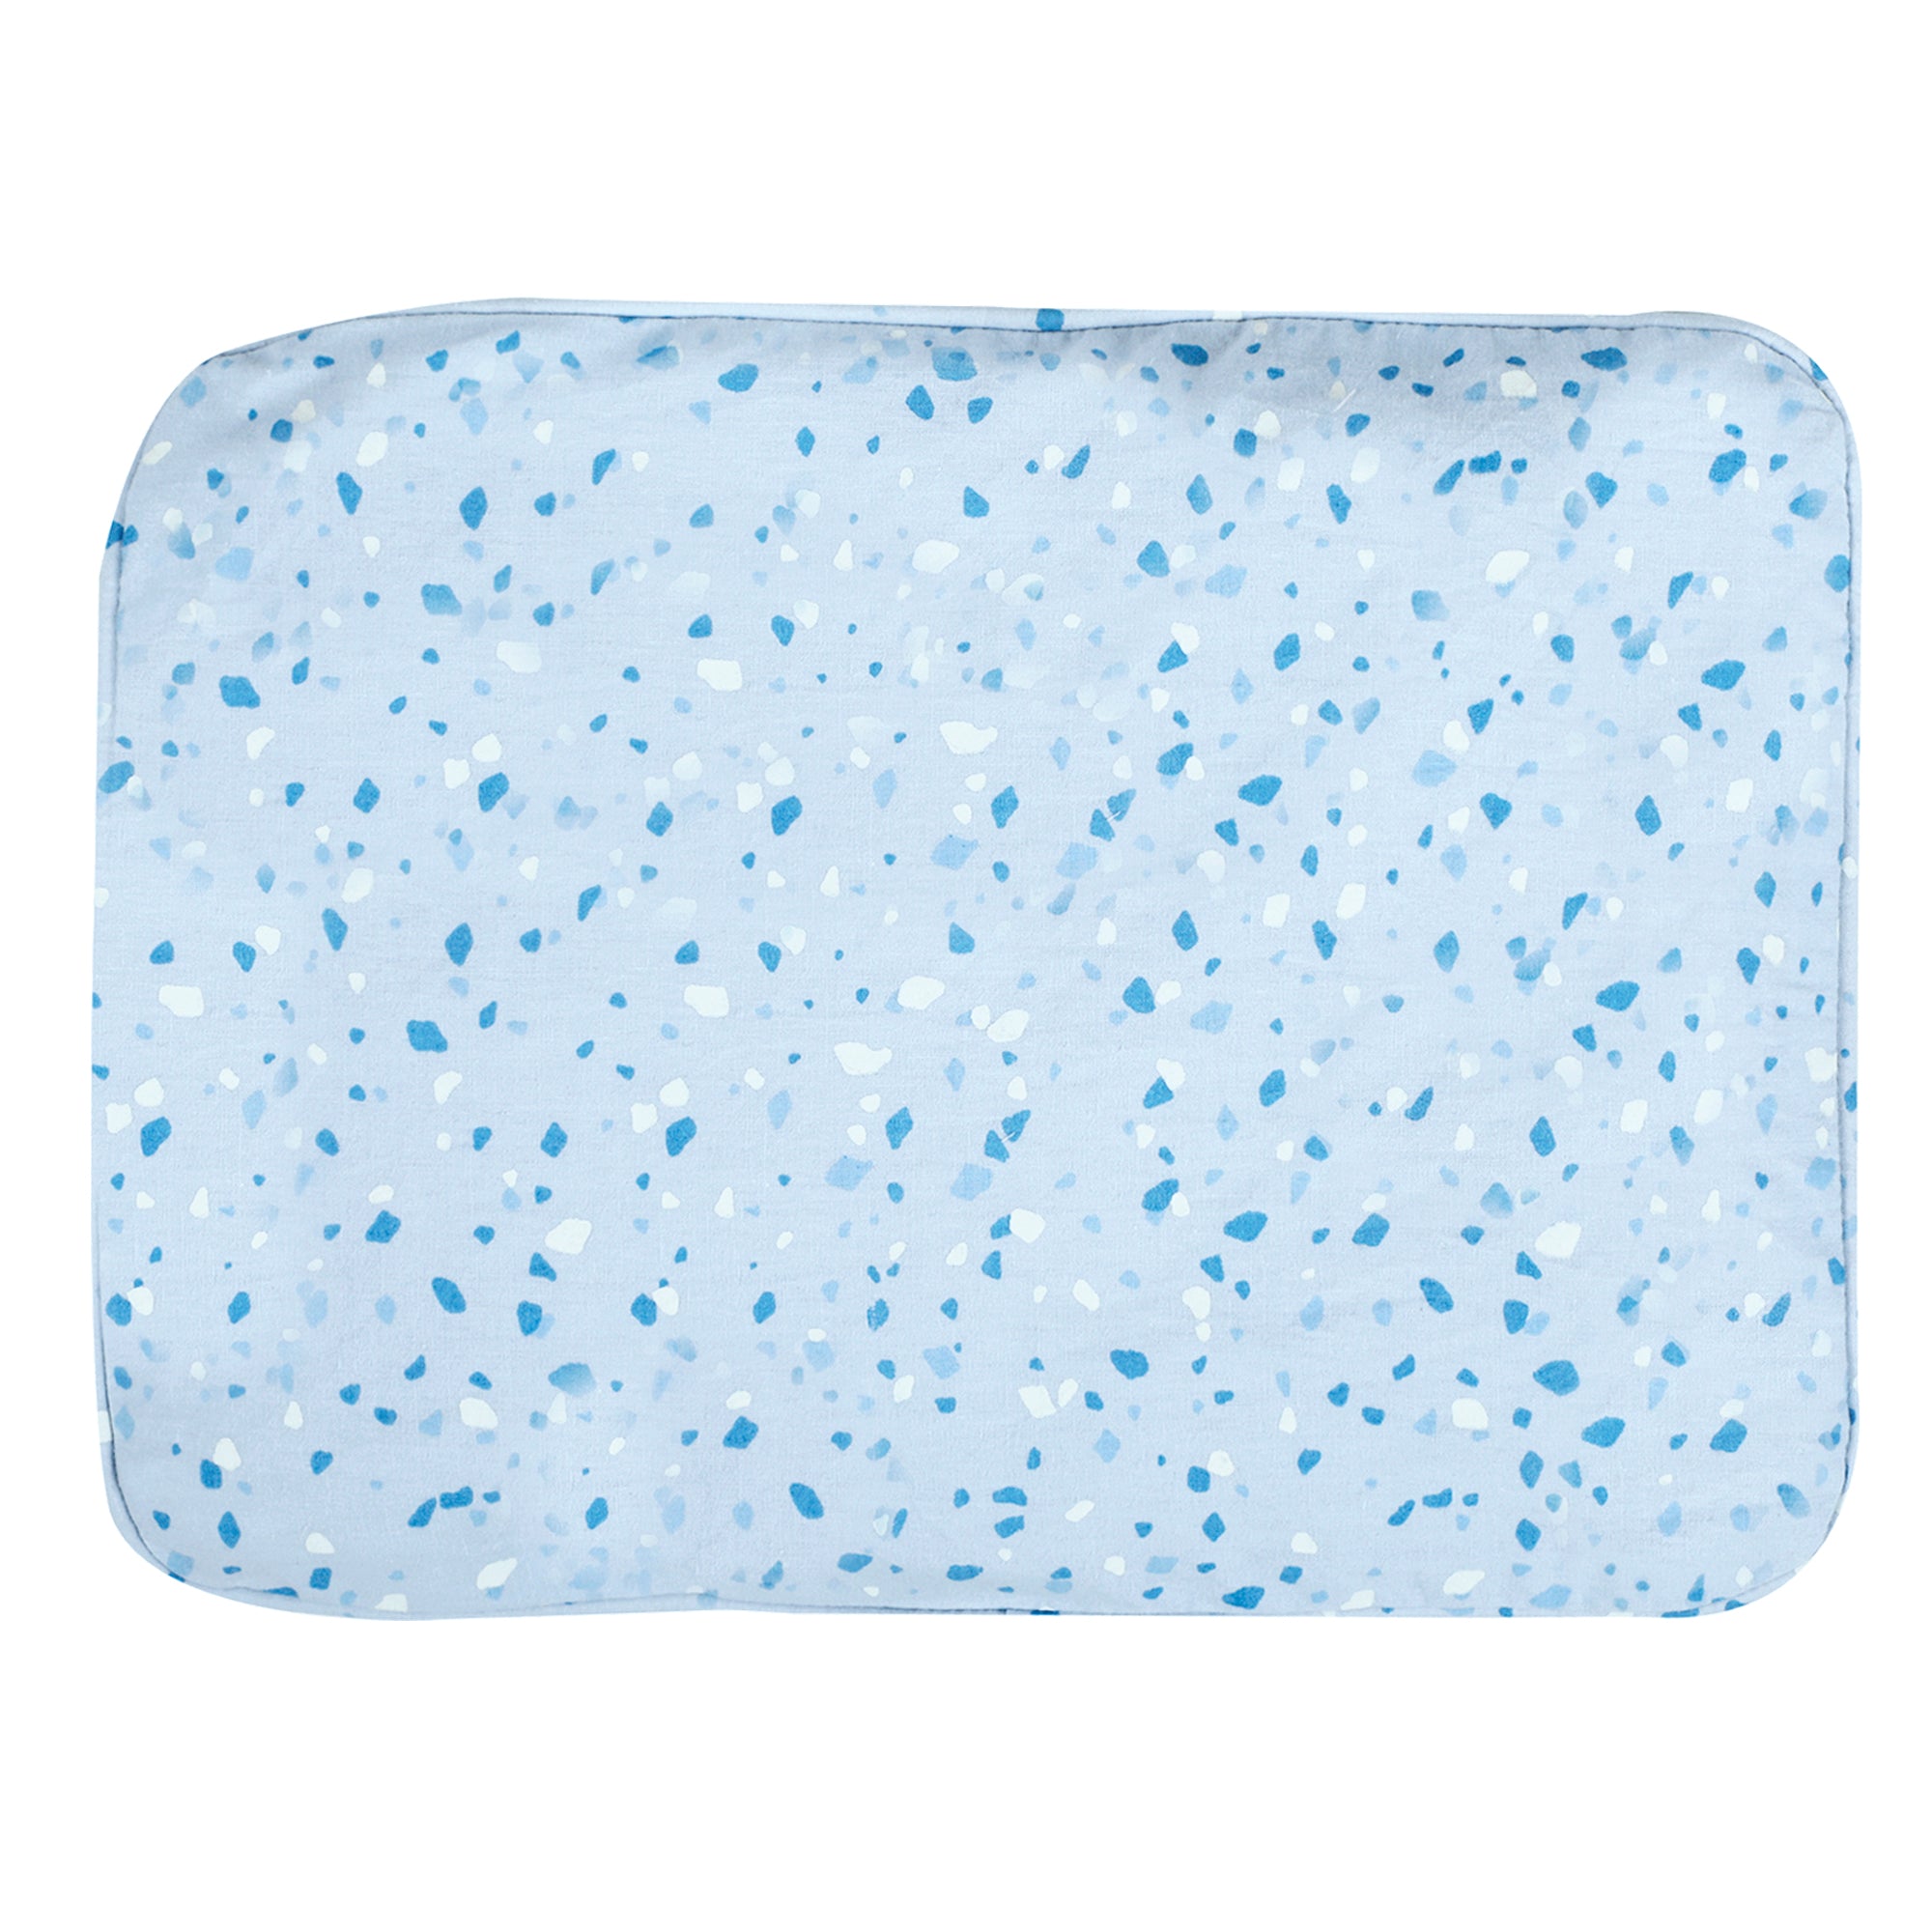 BABY BLUE TERRAZZO MUSTARD PILLOW COVER AND FILLER SET